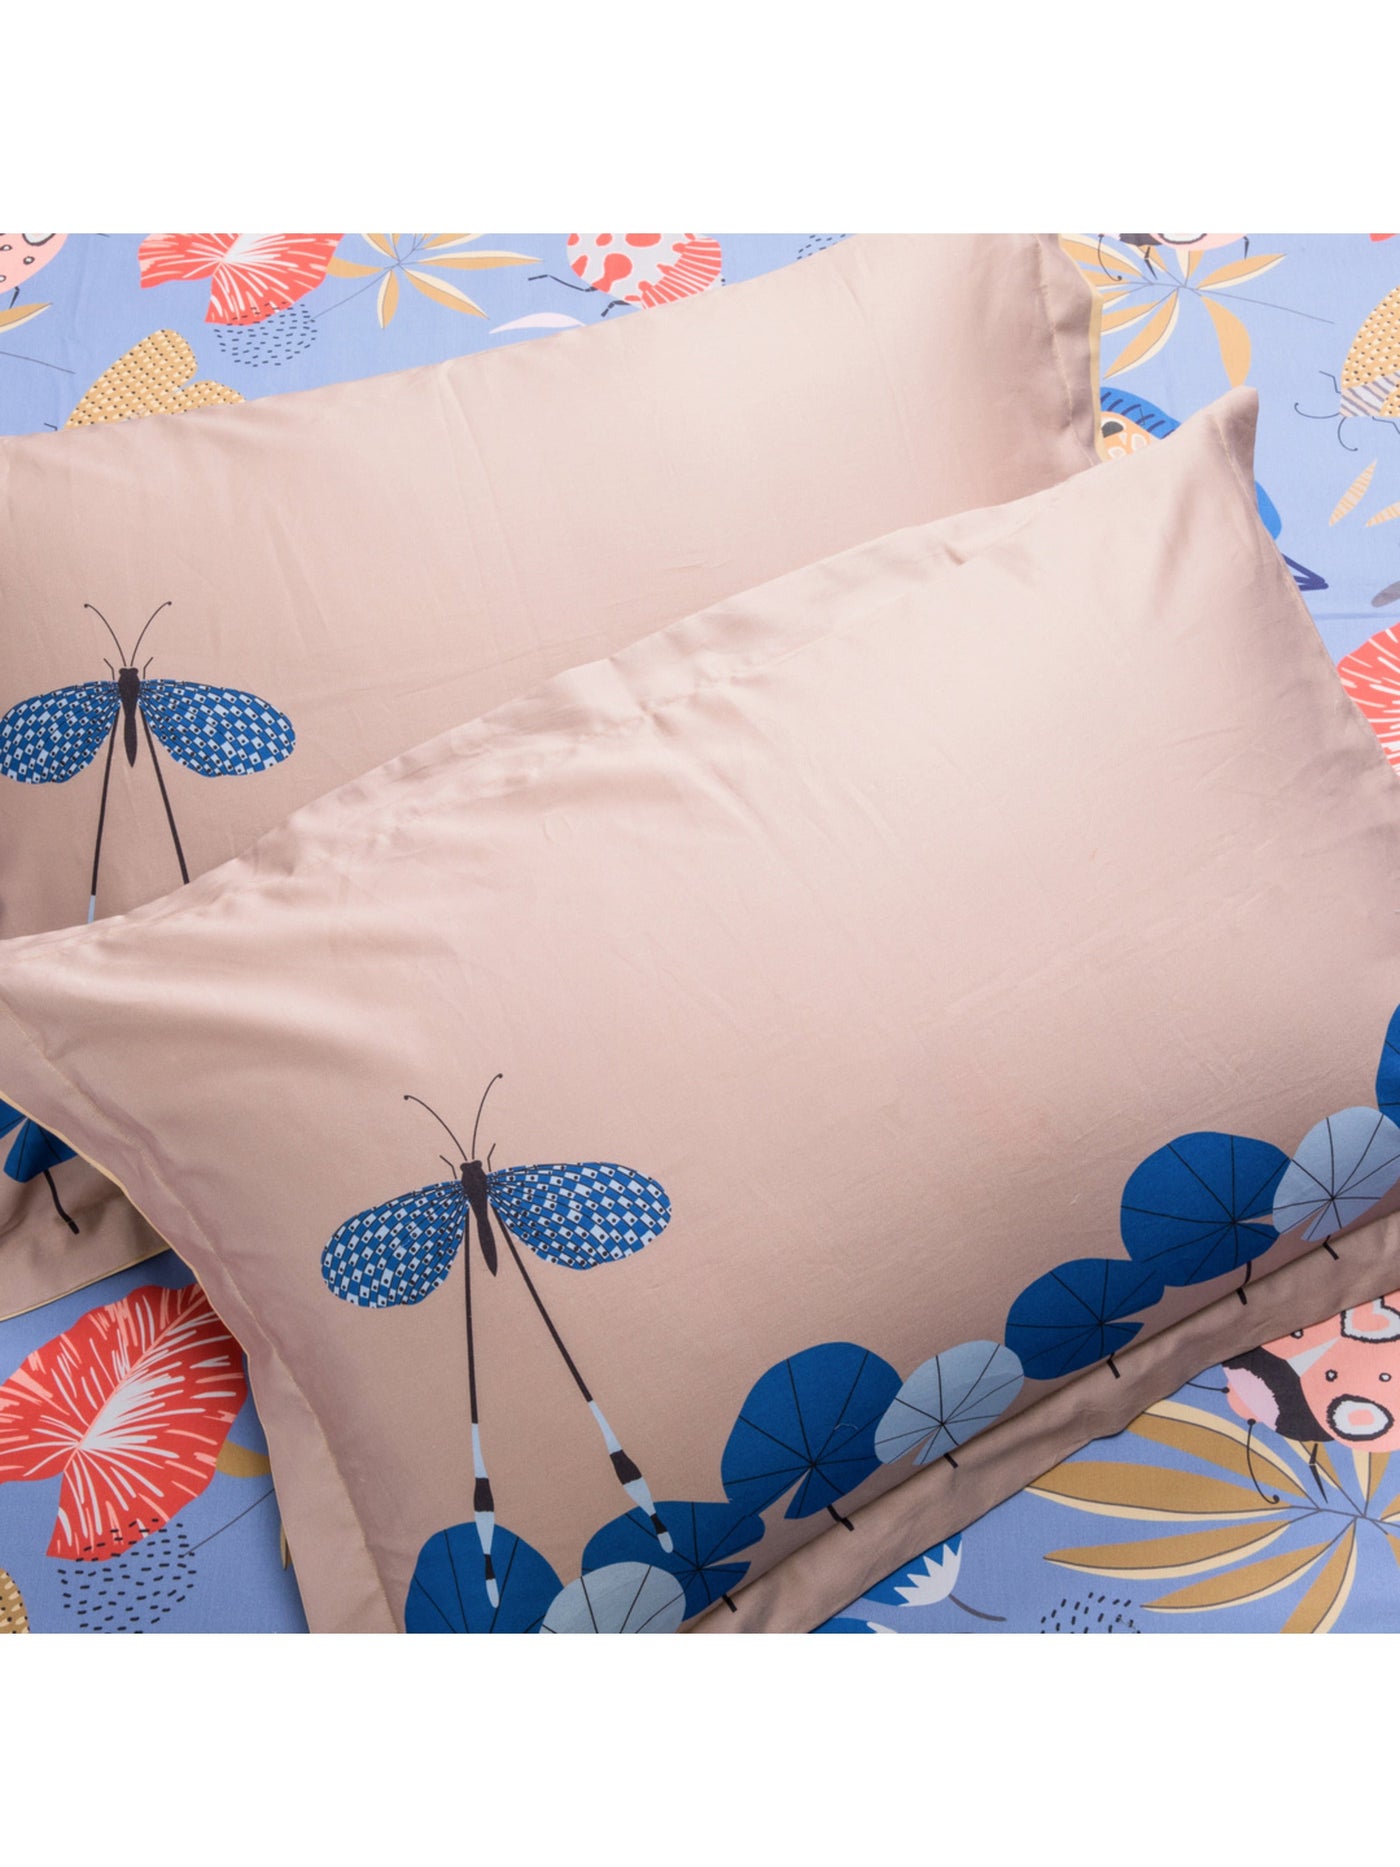 Bedsheet - The Forest Of Adventures In Blue Copy